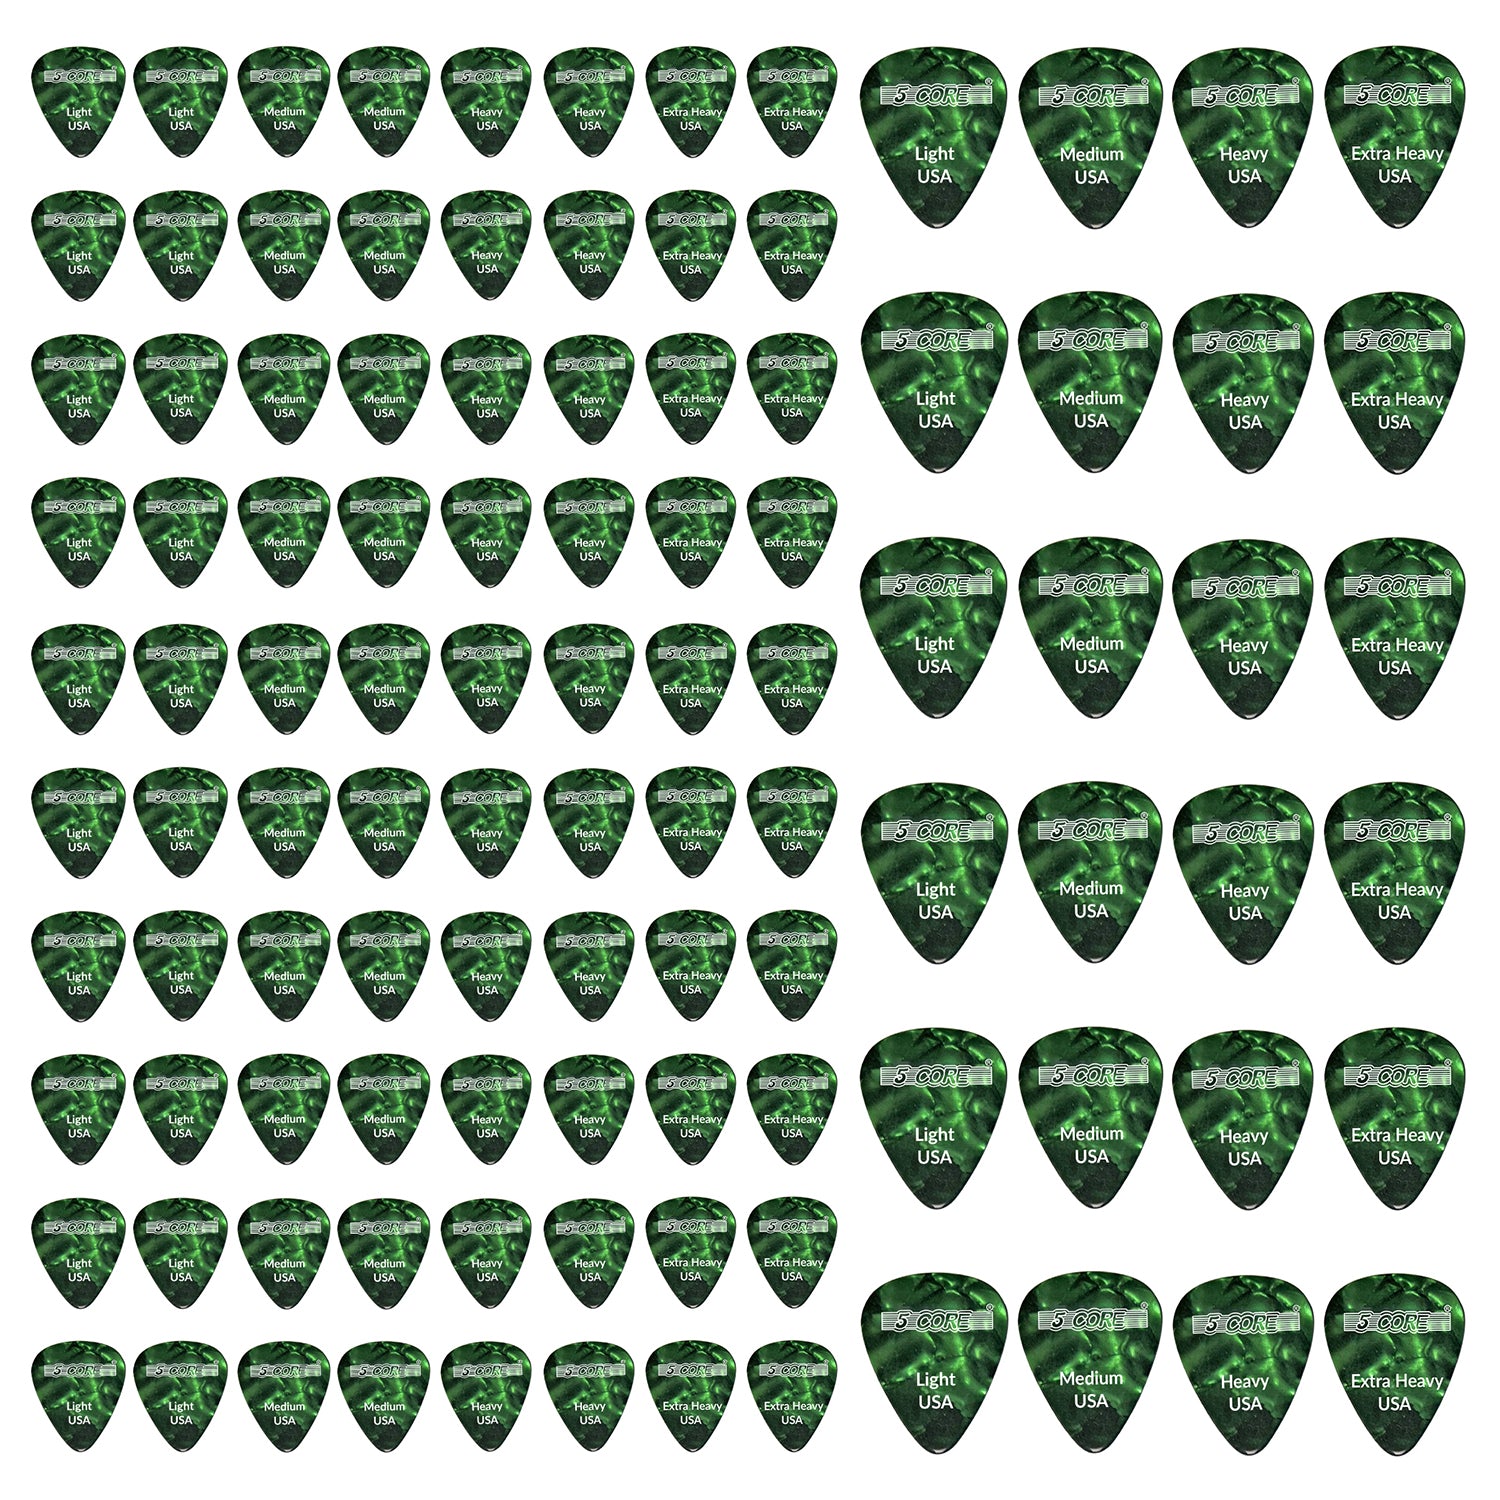 5 Core Celluloid Guitar Picks 96 Pack Green Light Medium Heavy Extra Heavy Gauge Plectrums for Acoustic Electric Bass Guitar